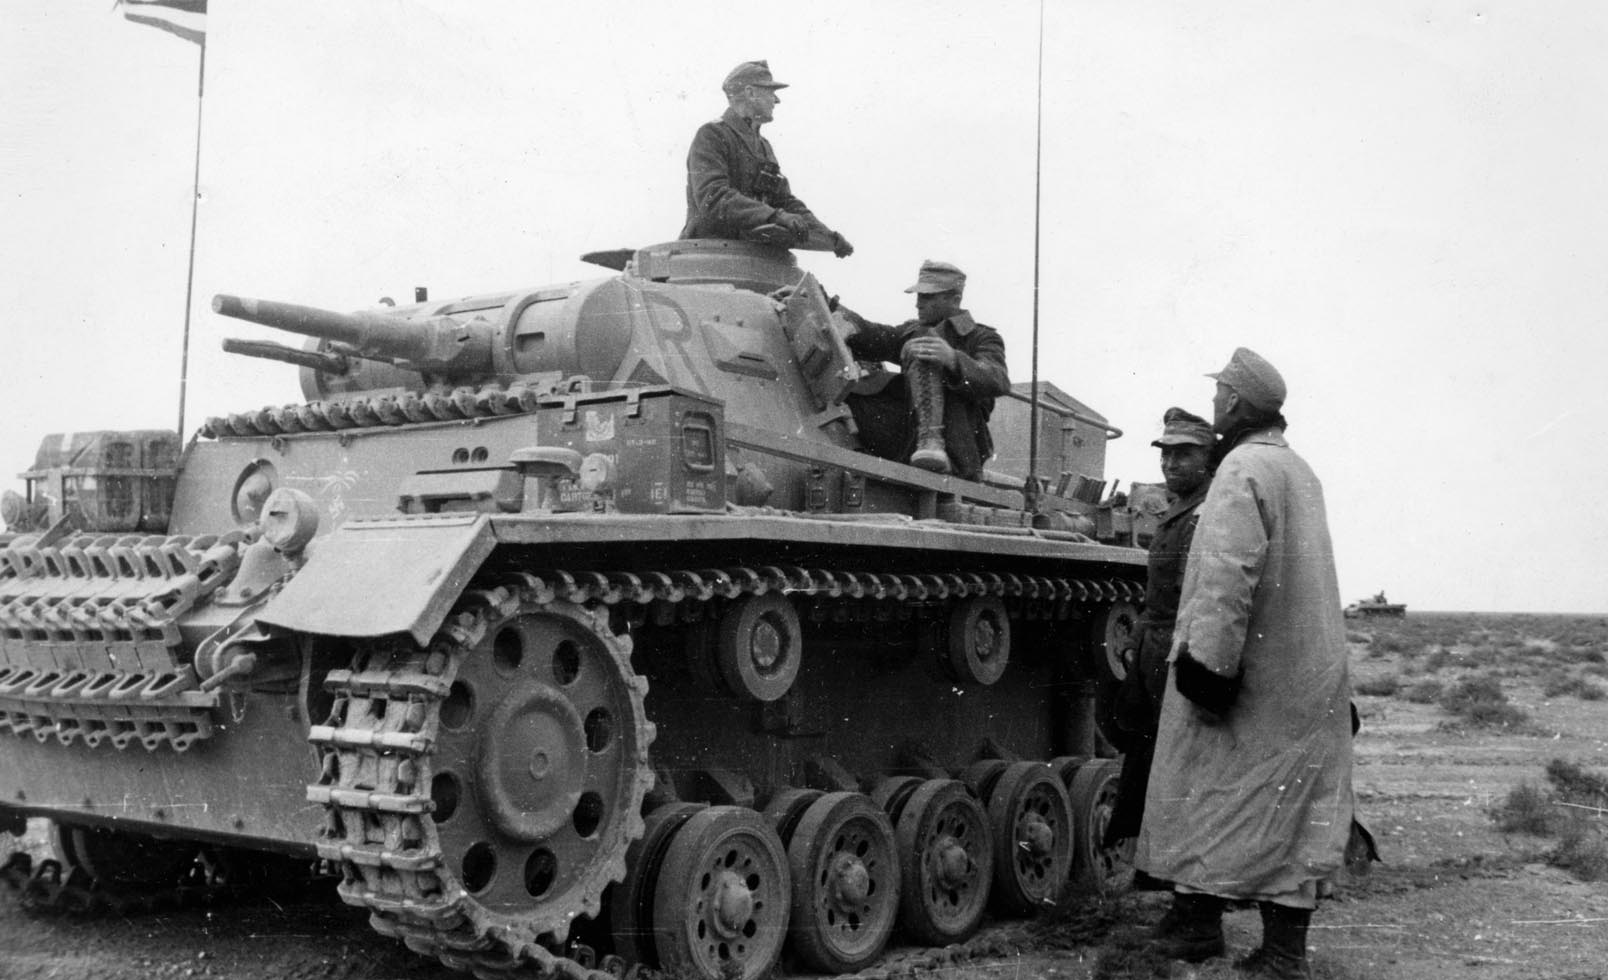 German panzer troops confer during a lull in the fighting. Rommel was forced to break off his attack on September 2 because of the severity of allied air attacks and lack of fuel.